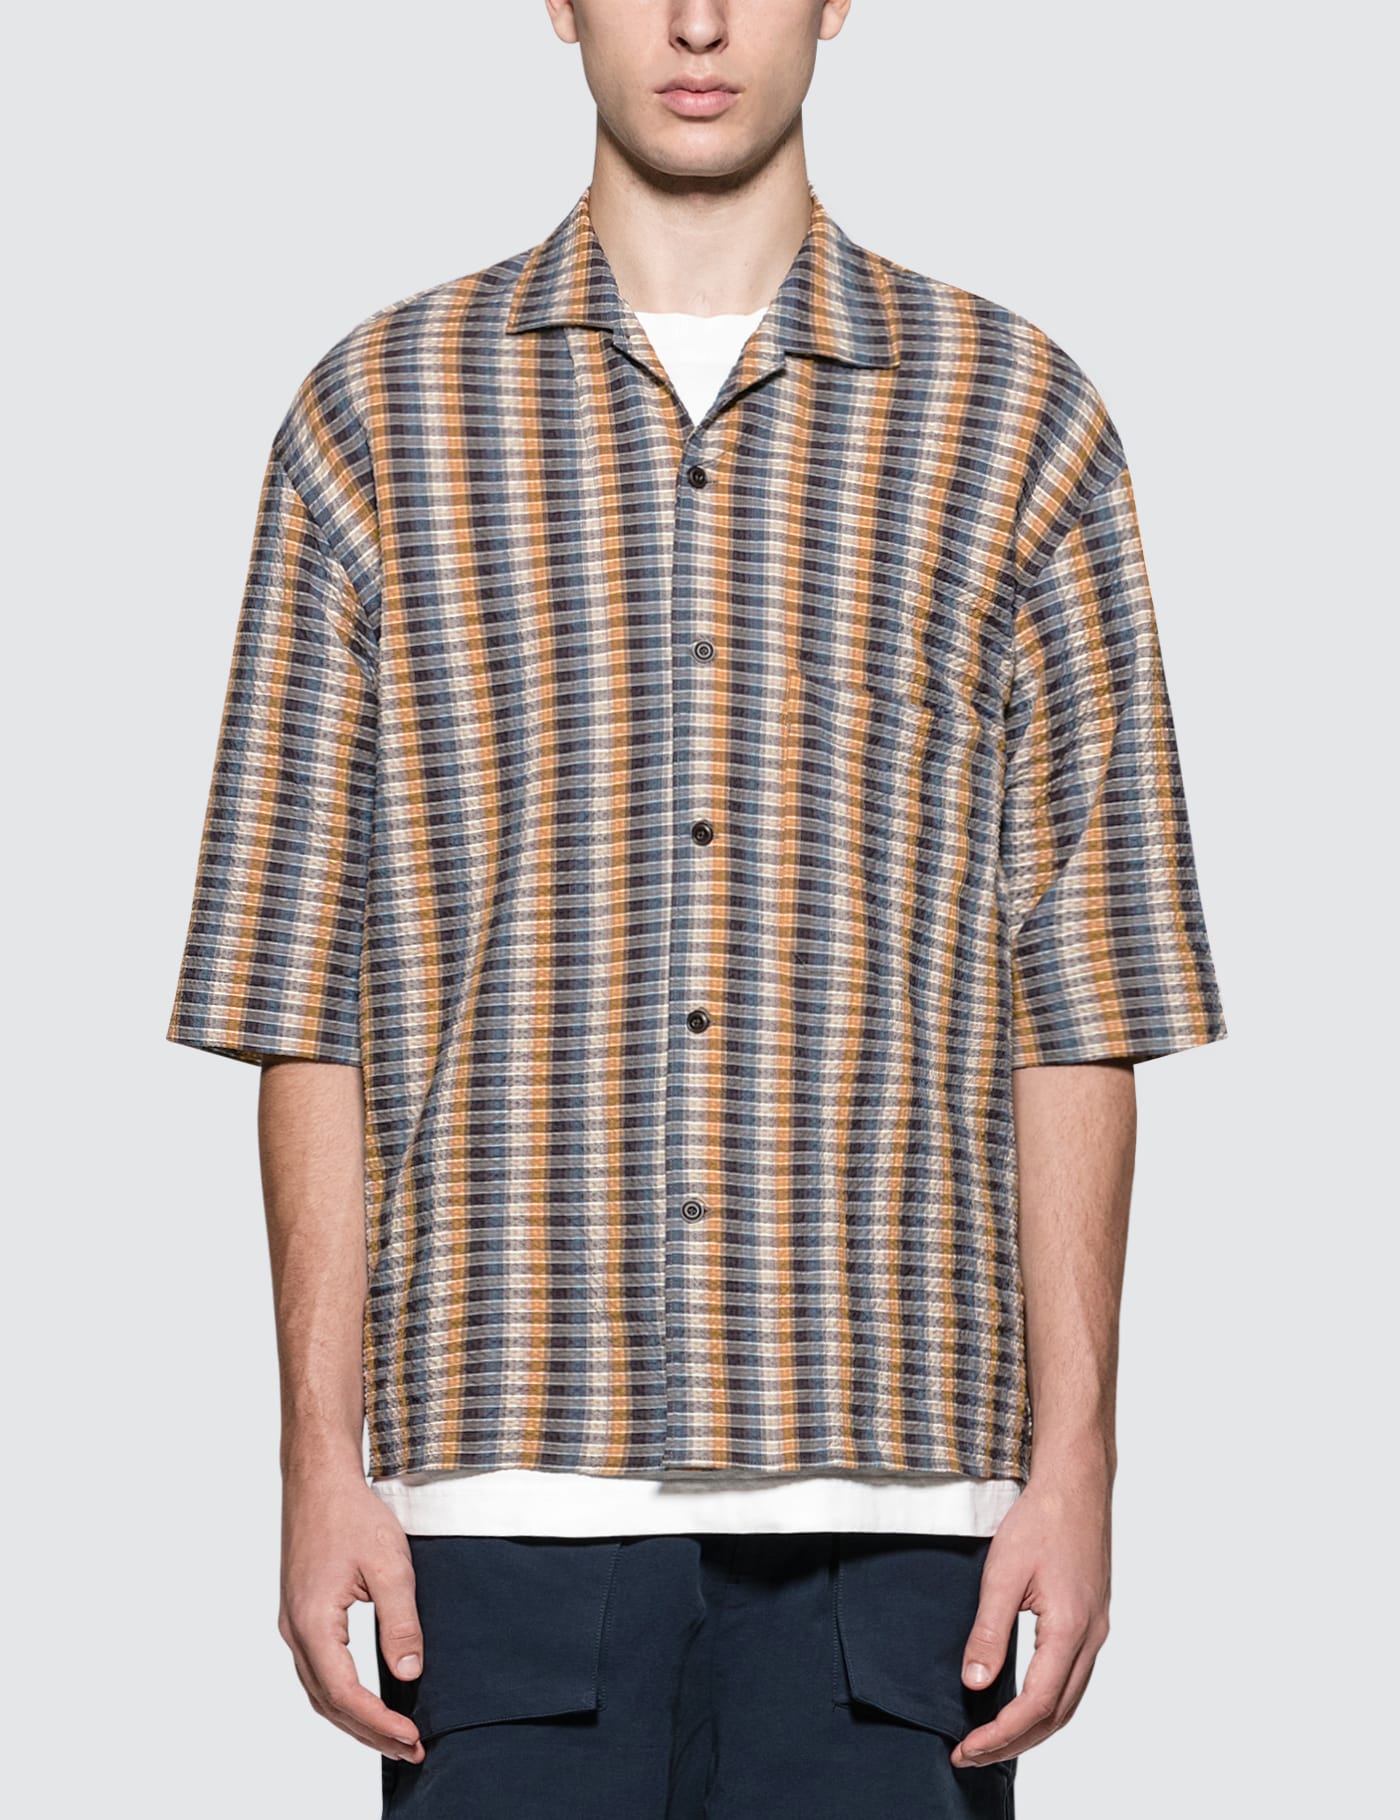 Lemaire - Convertible Collar Shirt | HBX - Globally Curated 